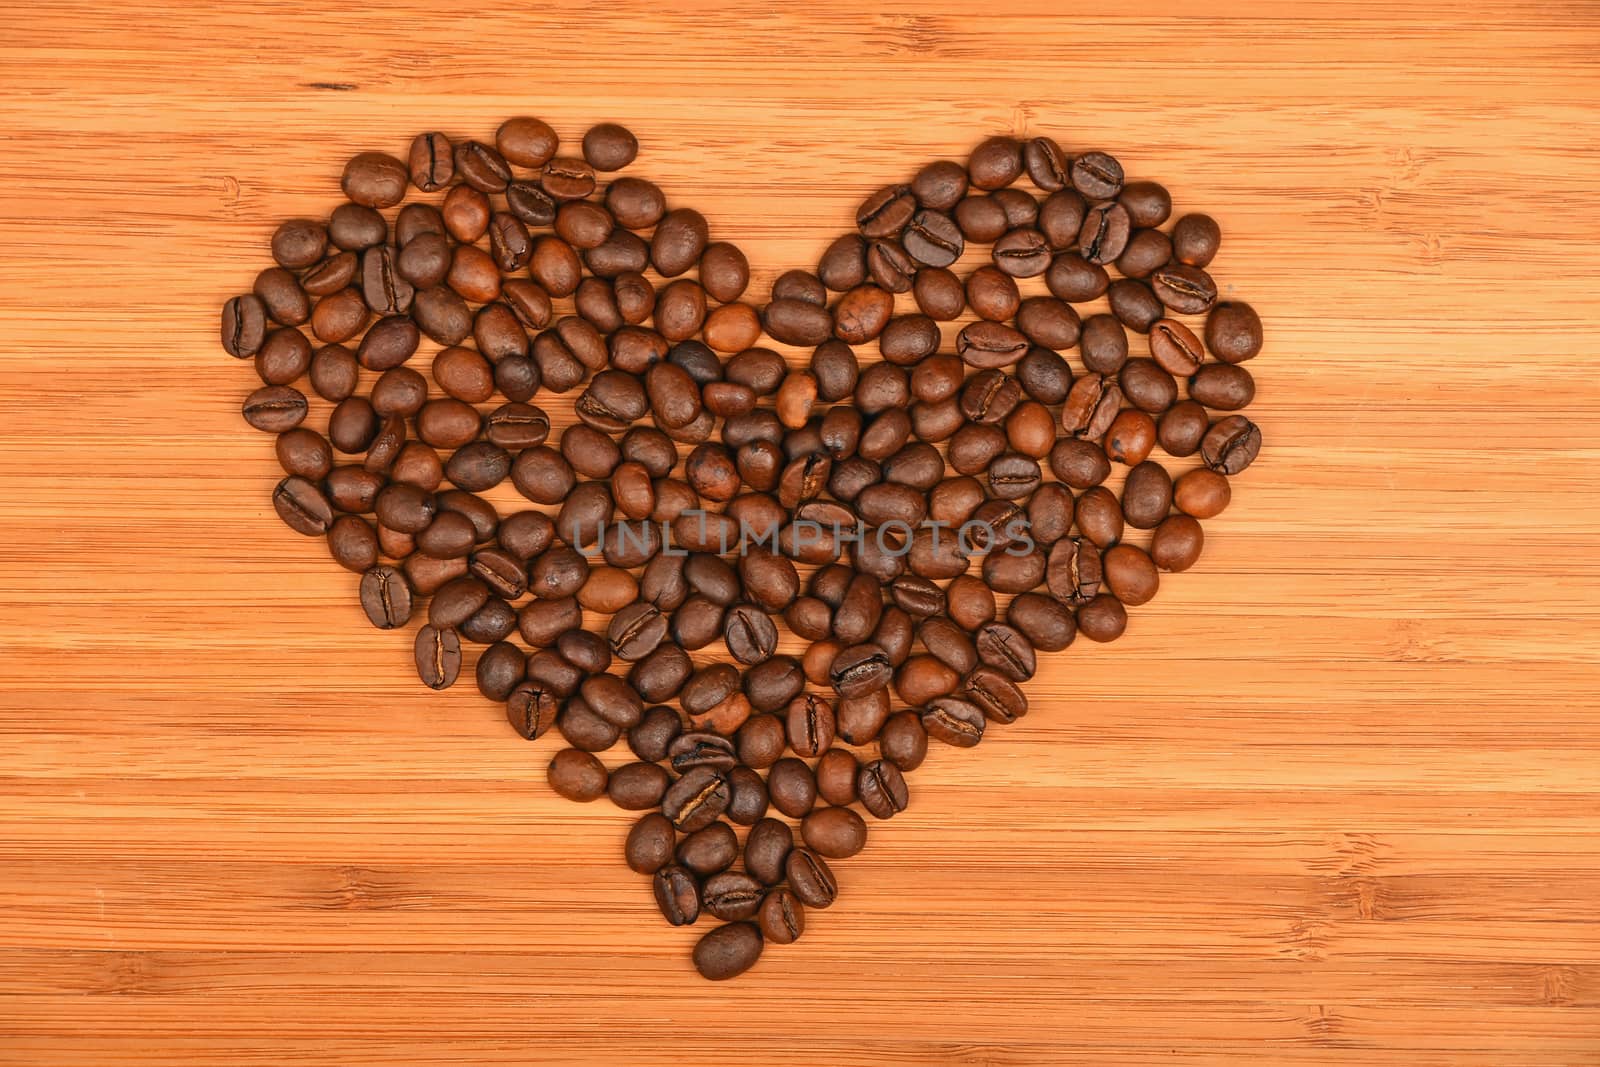 Heart shaped coffee beans of Roasted Arabica espresso beans over wooden bamboo board background